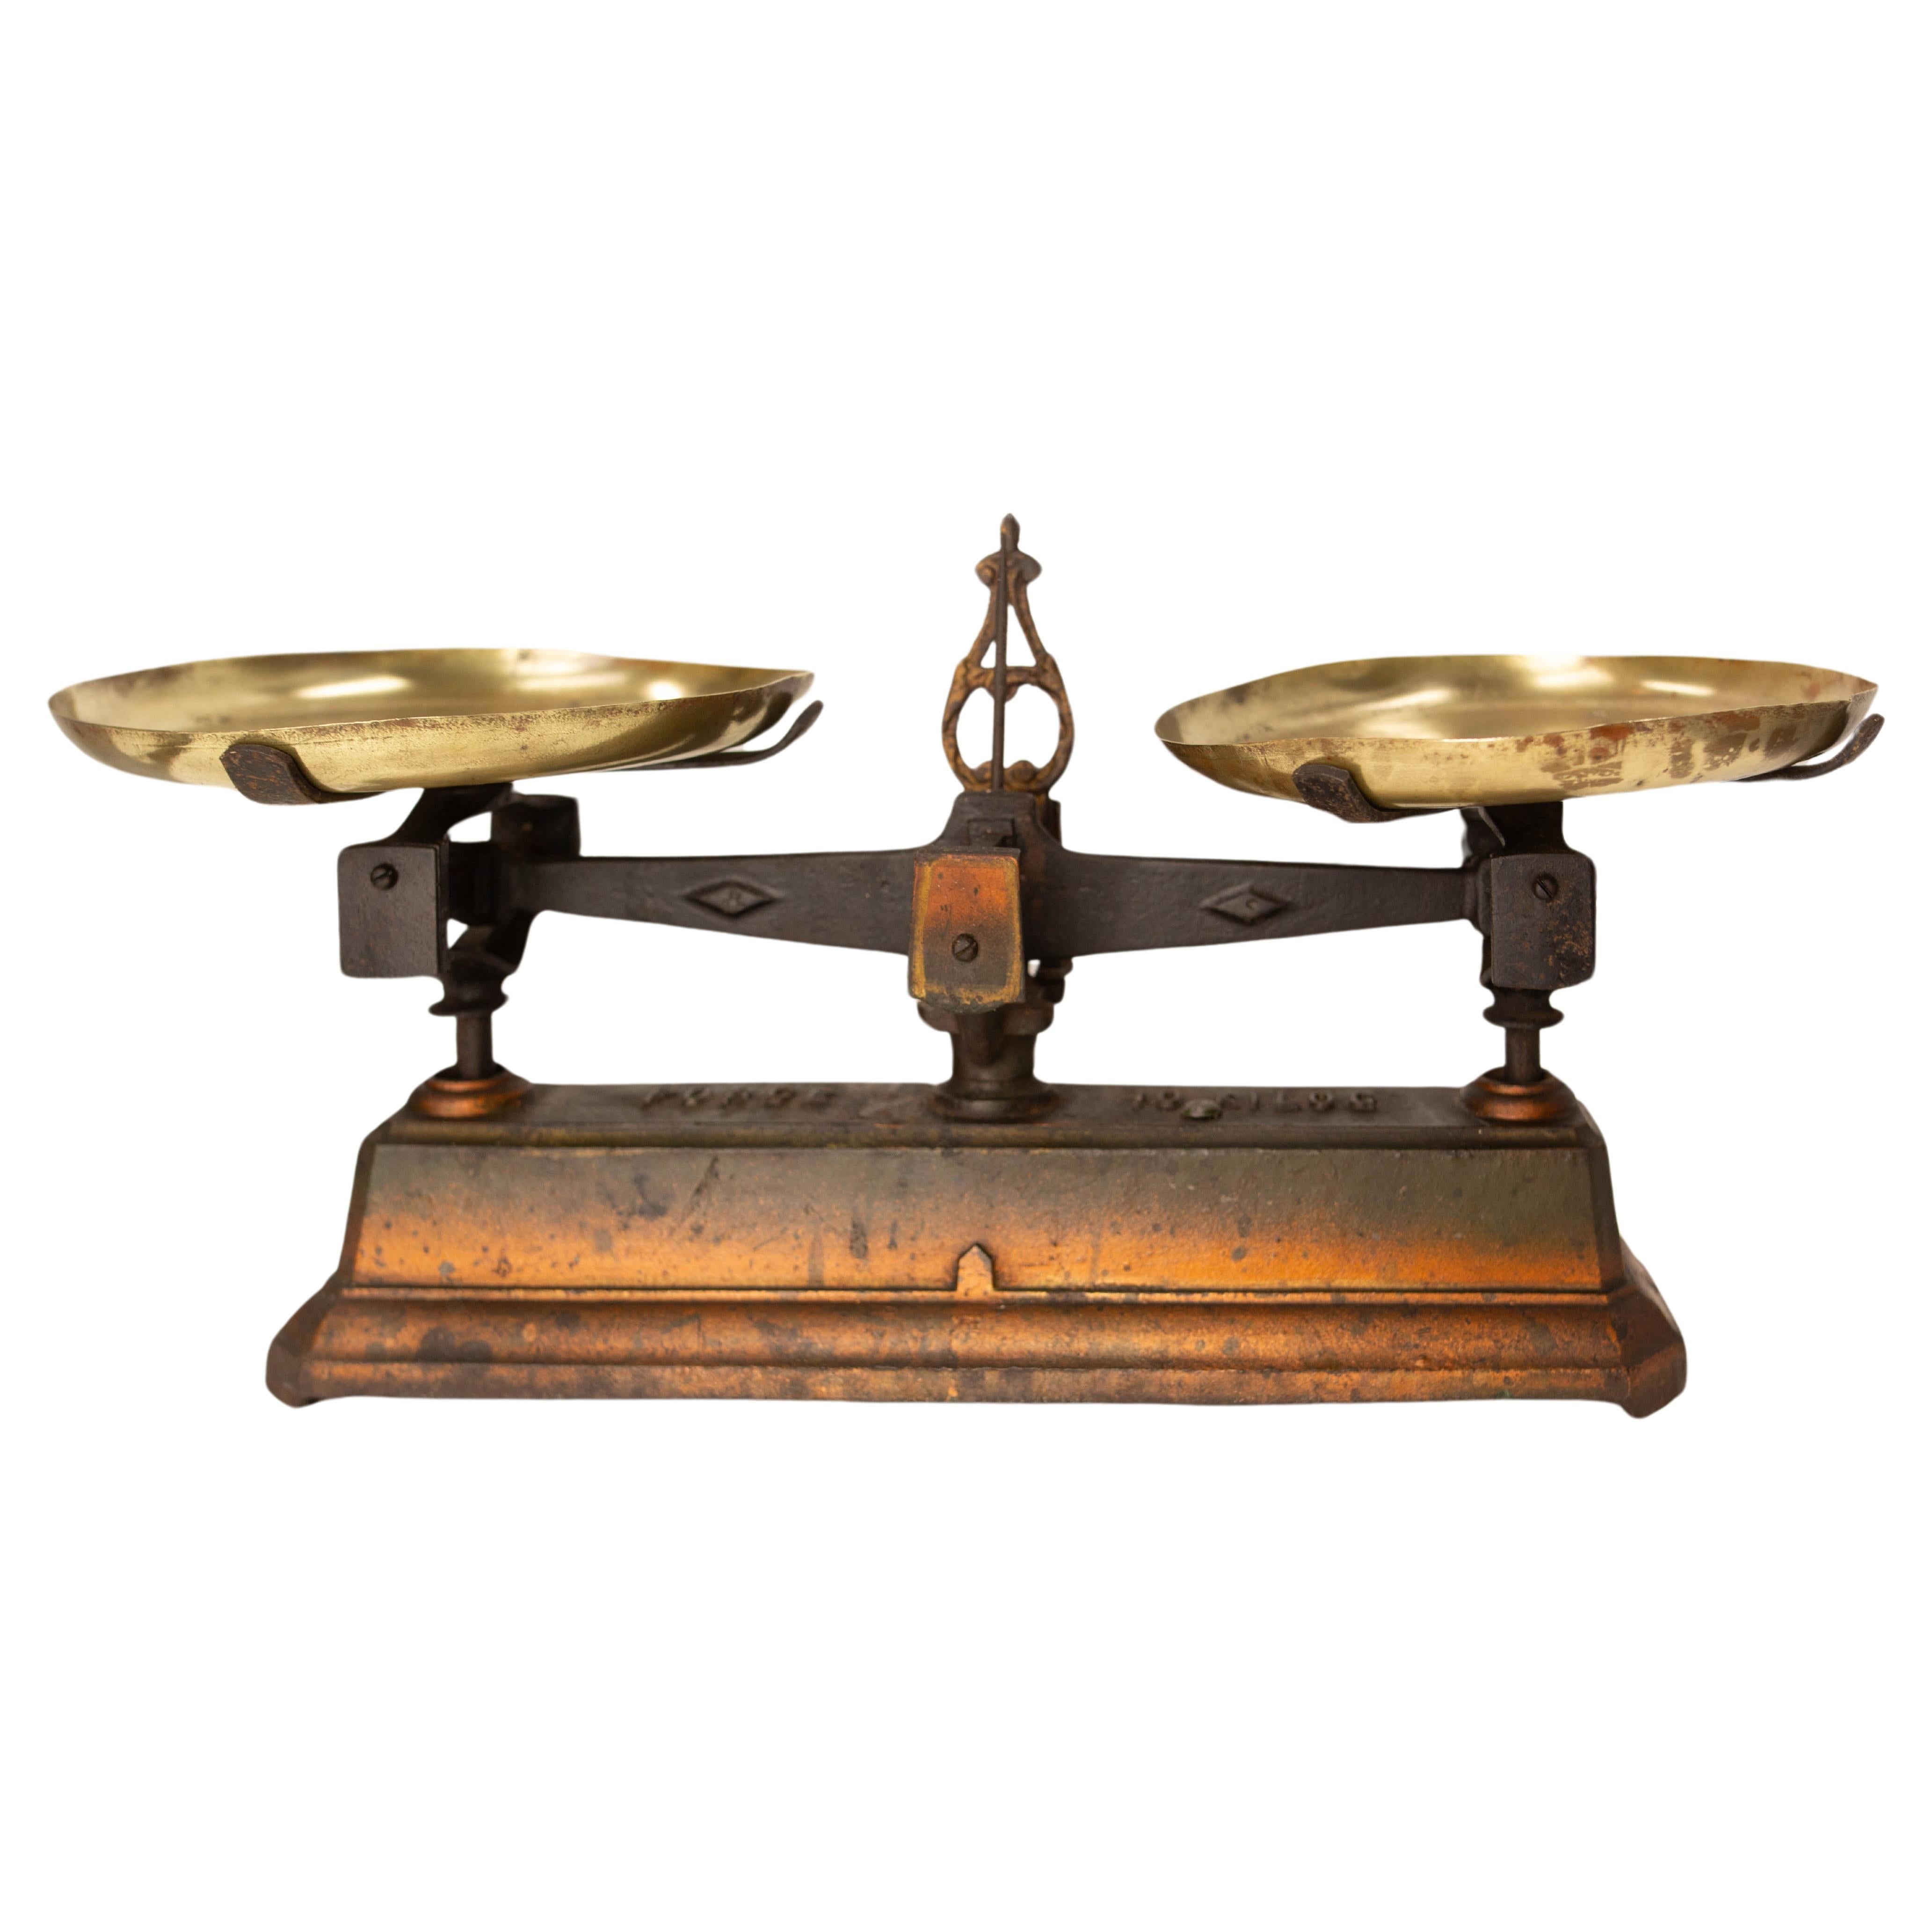 Antique Trade Scale Brass and Painted Cast Iron, France, circa 1880